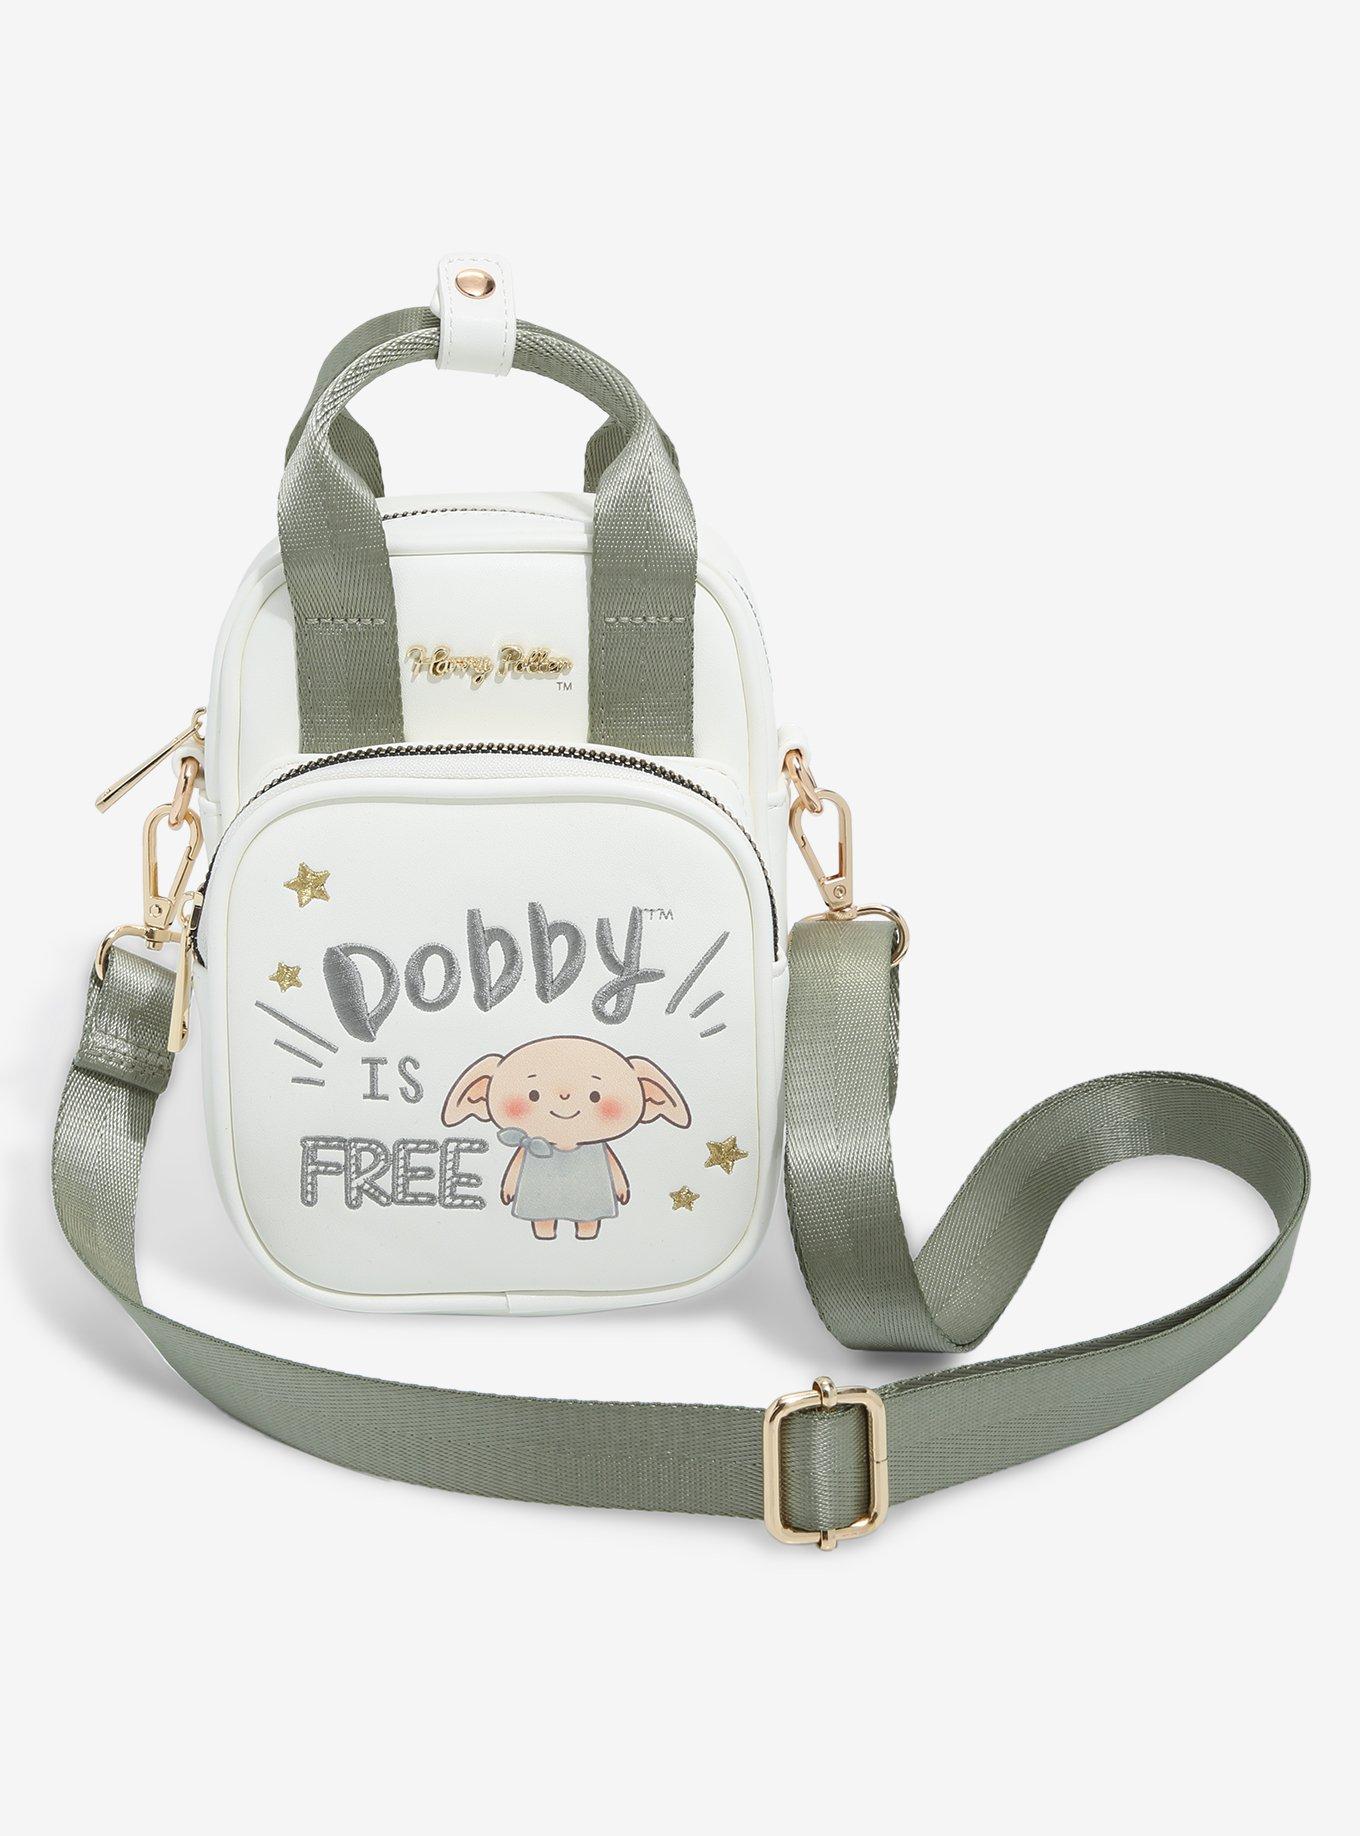 BoxLunch is BoxLunch Potter Chibi Exclusive Crossbody - Free | Bag Harry Dobby